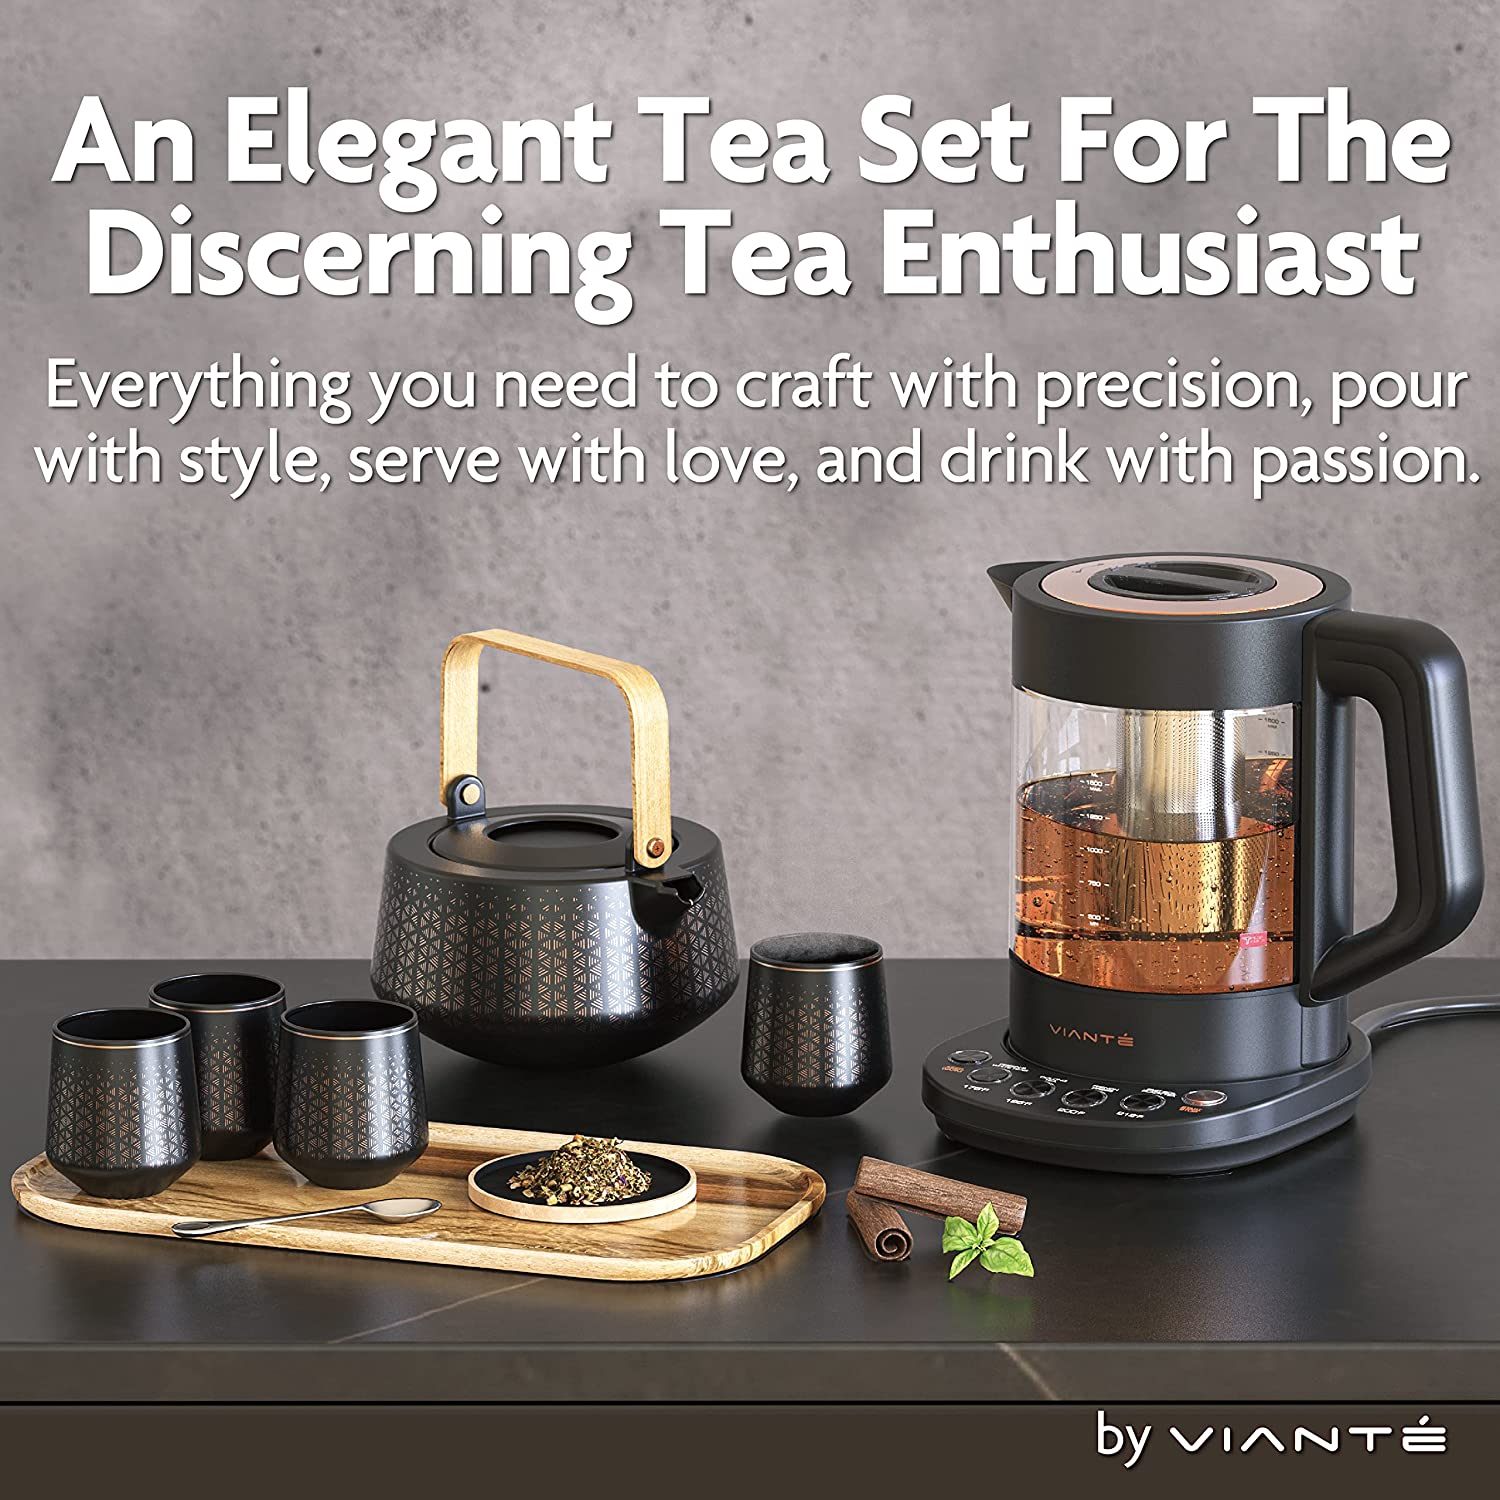 https://bigbigmart.com/wp-content/uploads/2023/07/Viante-Luxury-Tea-Party-Set.-Complete-with-Automatic-Tea-Maker-with-Tea-Infuser-for-loose-tea-or-tea-bags.-Ceramic-serving-set.-Tea-pot-tea-cup-set-and-wooden-tray.-Excellent-gift-for-tea-lovers.1.jpg